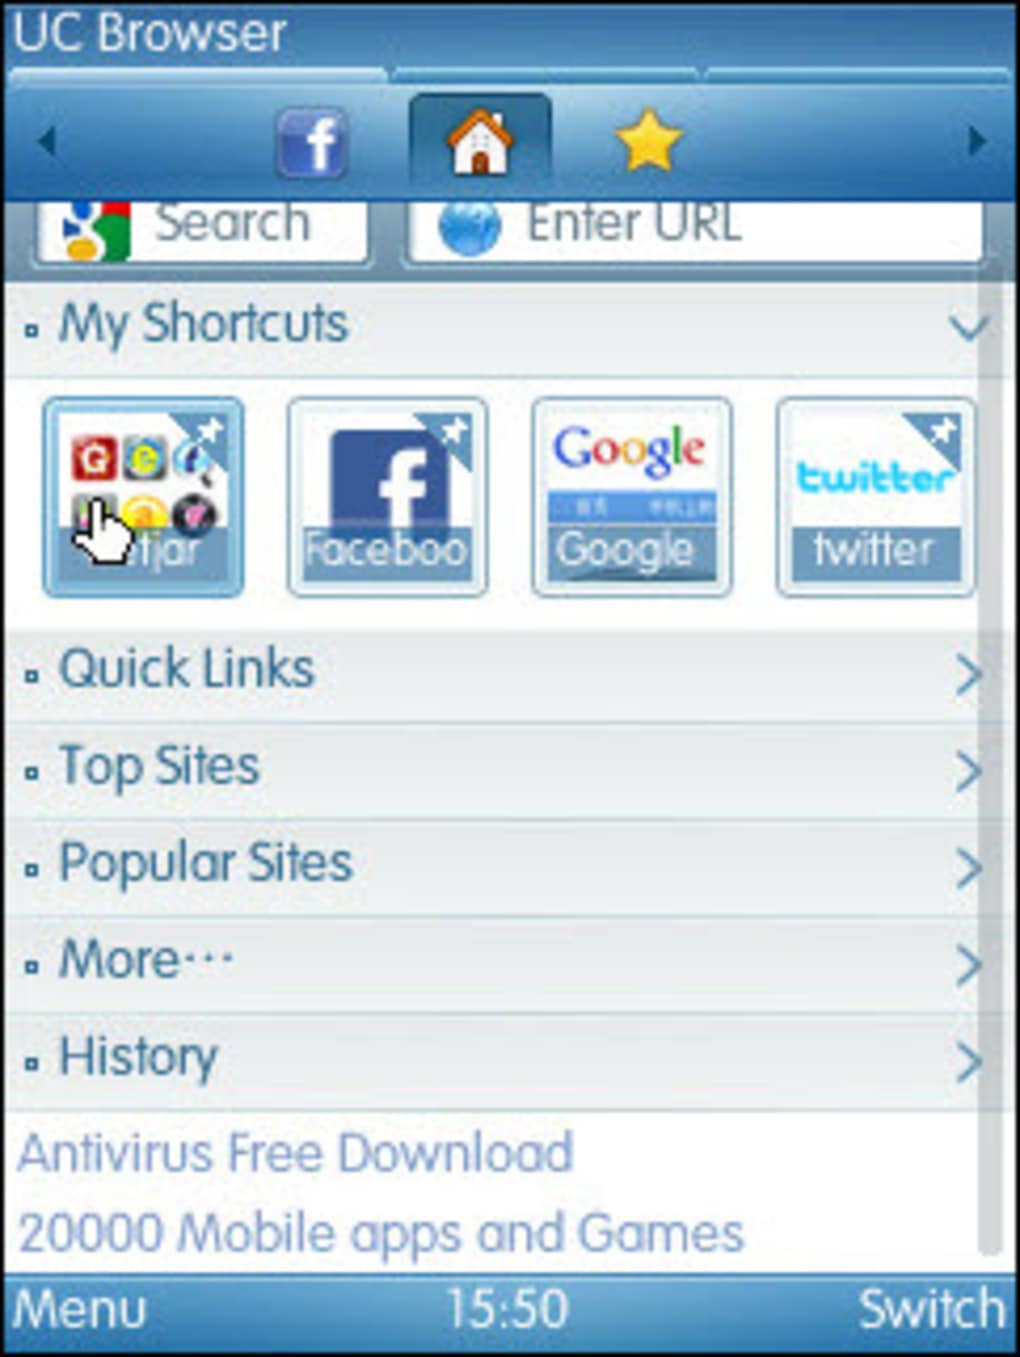 Dedomil Download Uc Browser File For Java - Our team ...